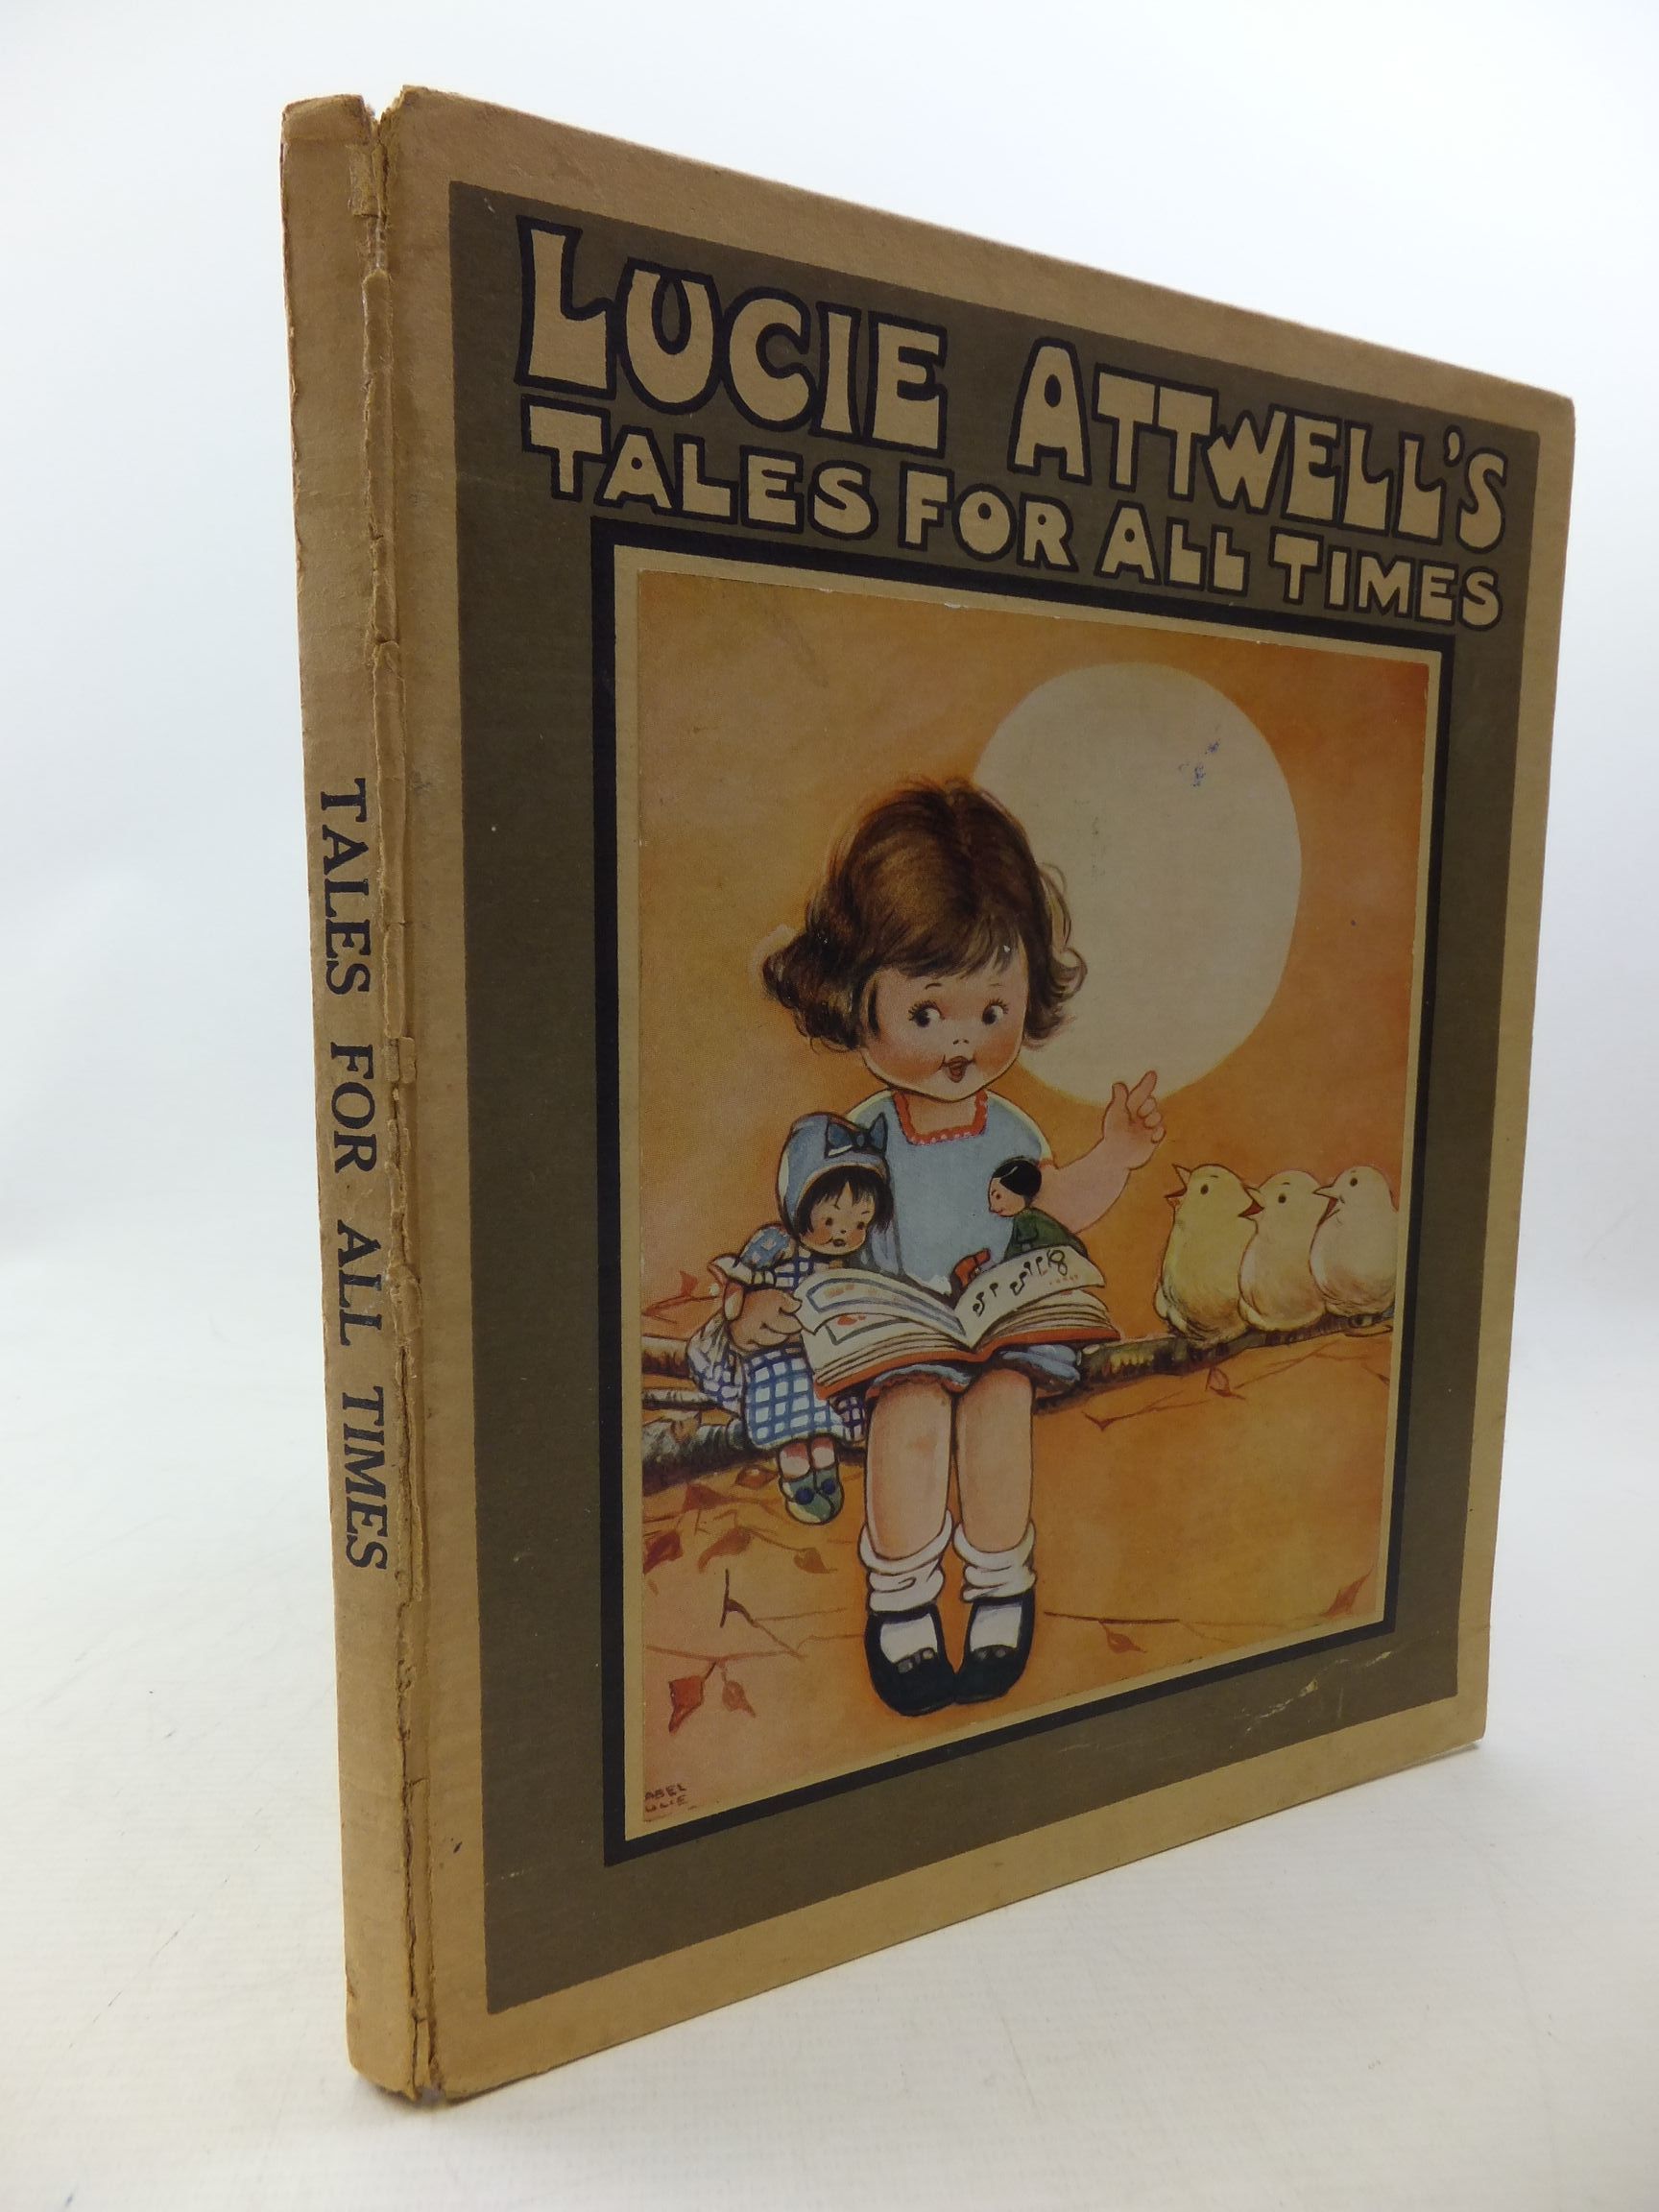 Photo of LUCIE ATTWELL'S TALES FOR ALL TIMES written by Attwell, Mabel Lucie illustrated by Attwell, Mabel Lucie published by S.W. Partridge & Co. (STOCK CODE: 1710684)  for sale by Stella & Rose's Books